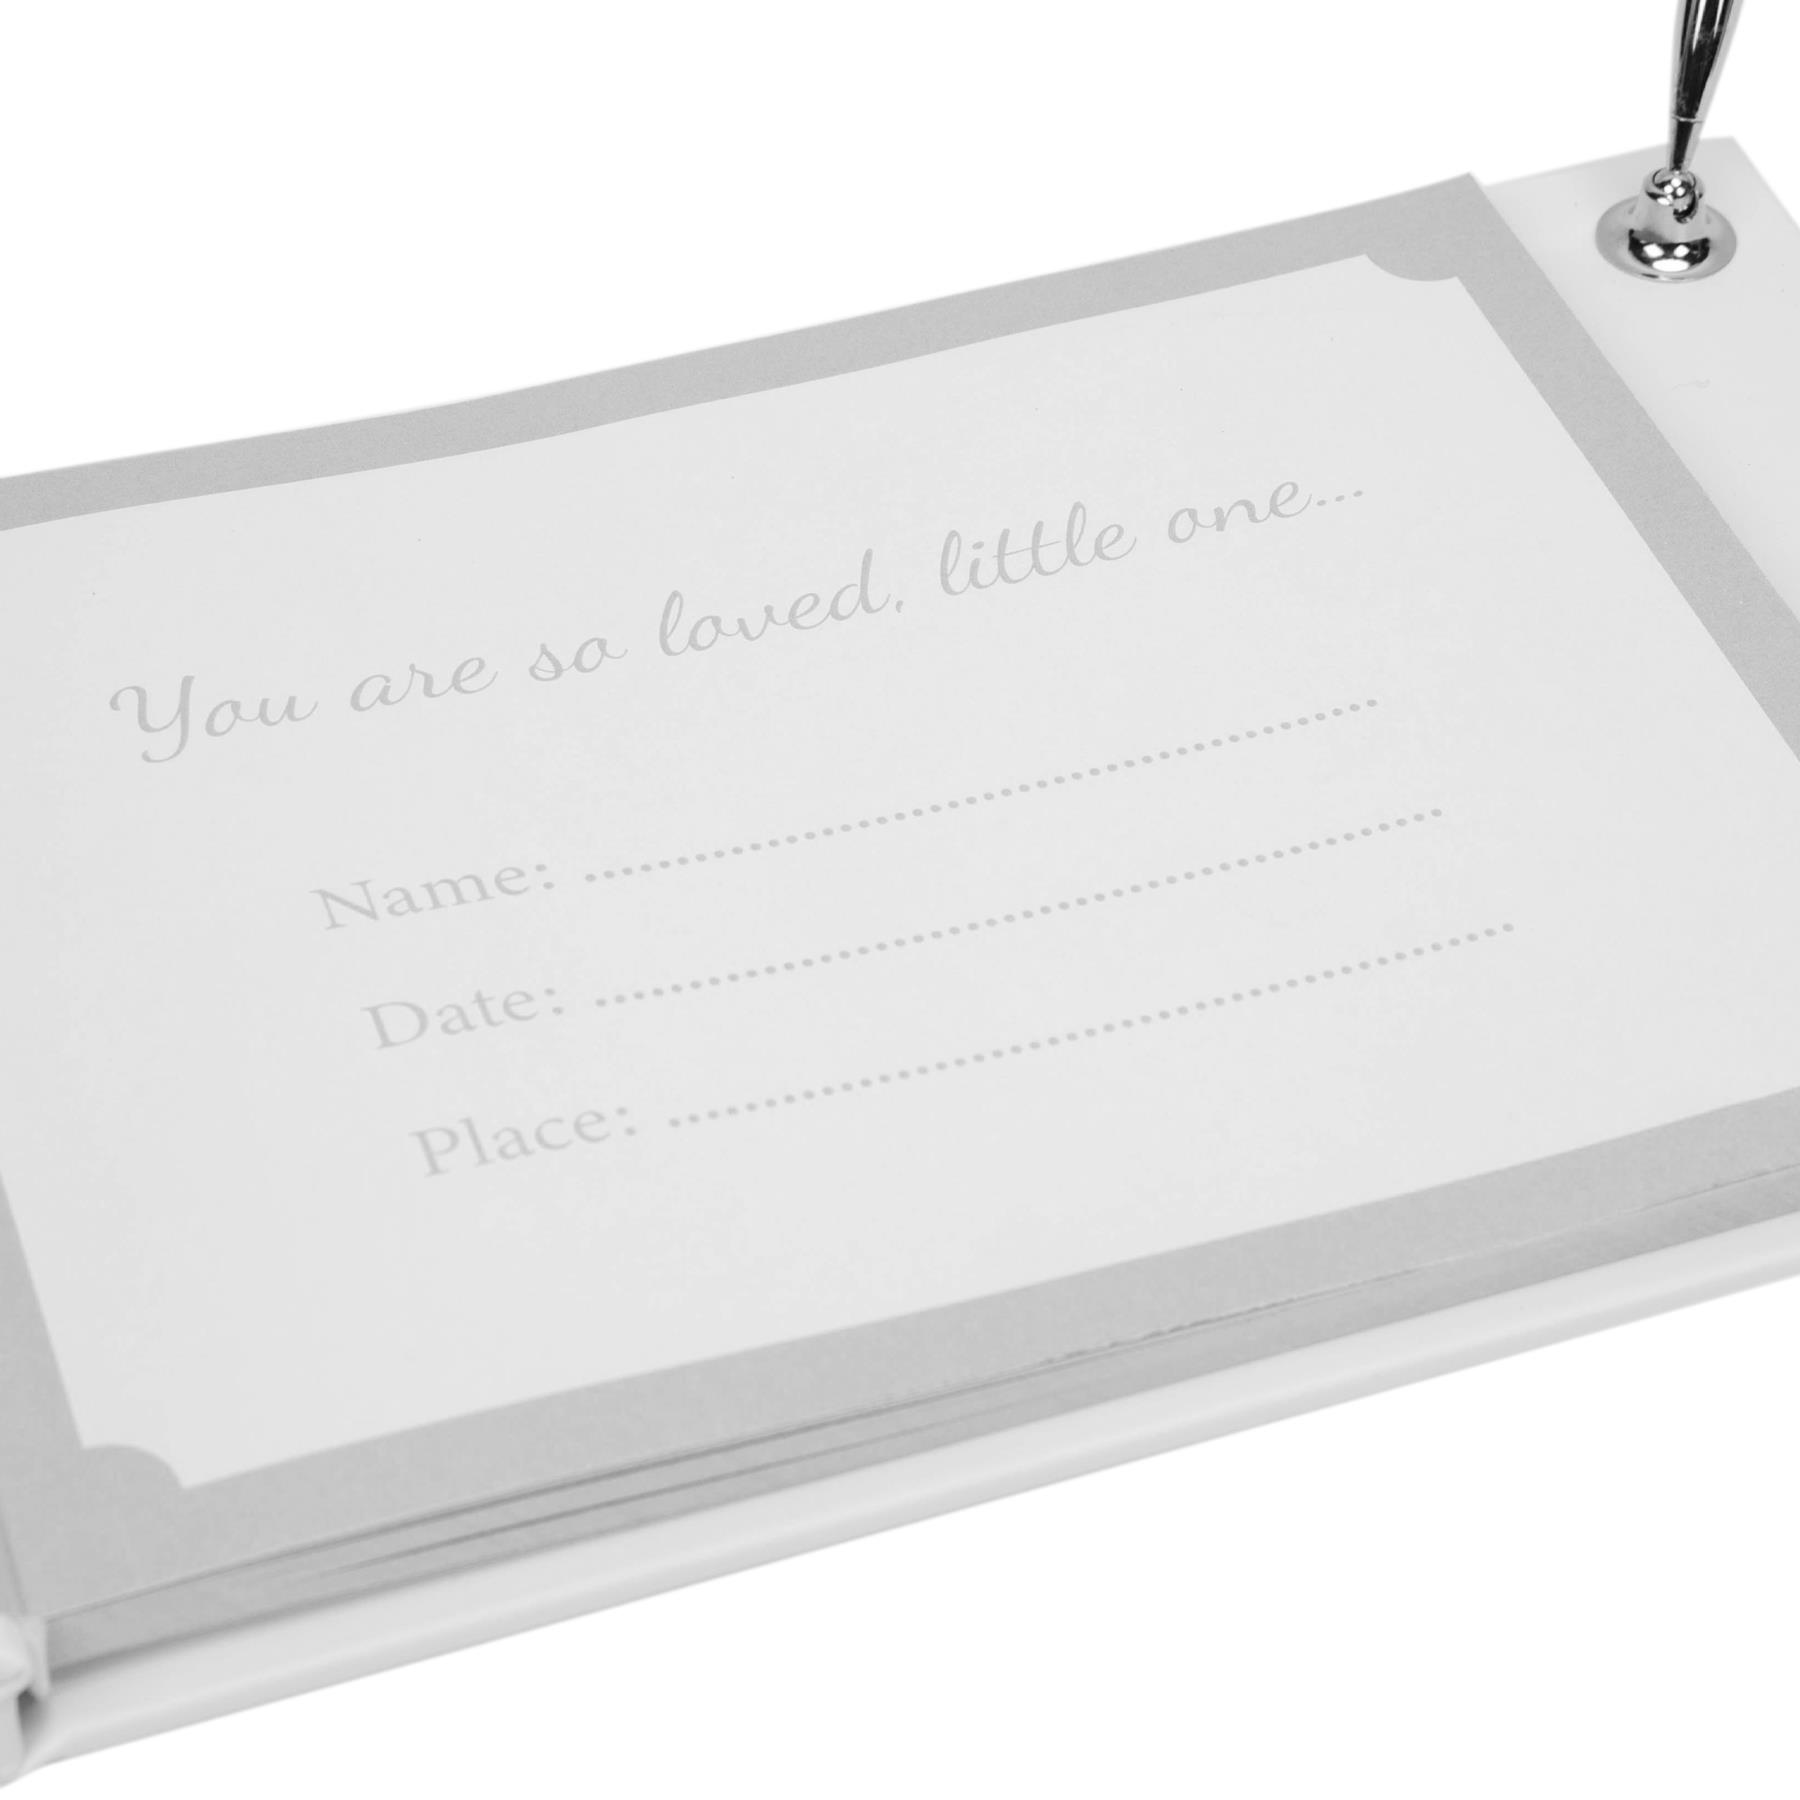 Baby Shower / Christening Guest Book and Pen Set - White